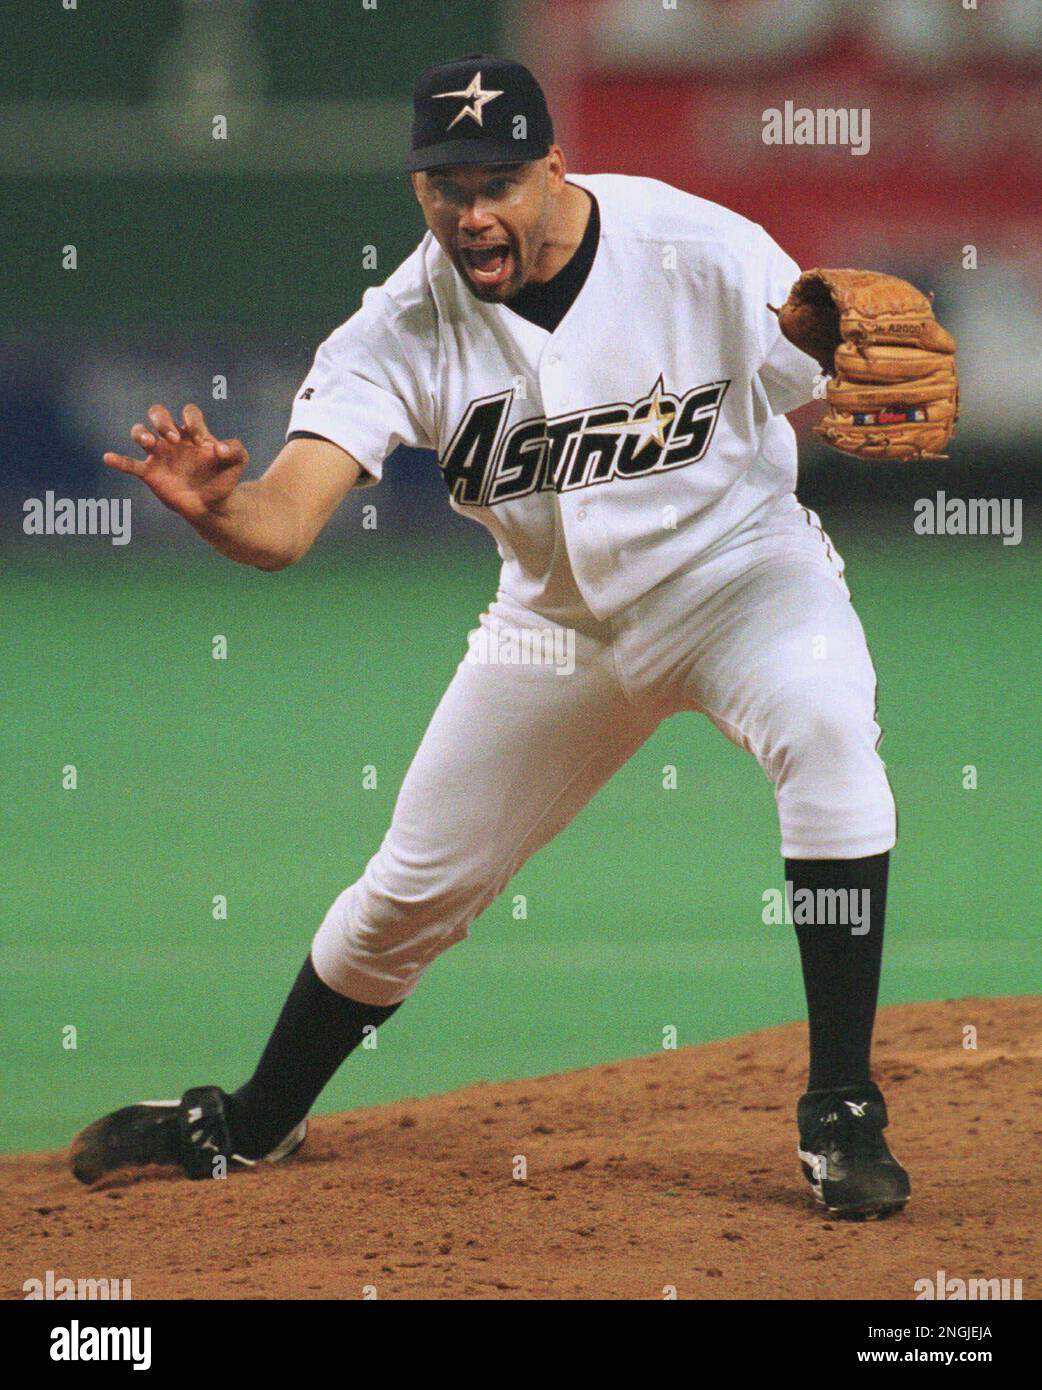 Houston Astros pitcher Jose Lima throws a pitch in the second